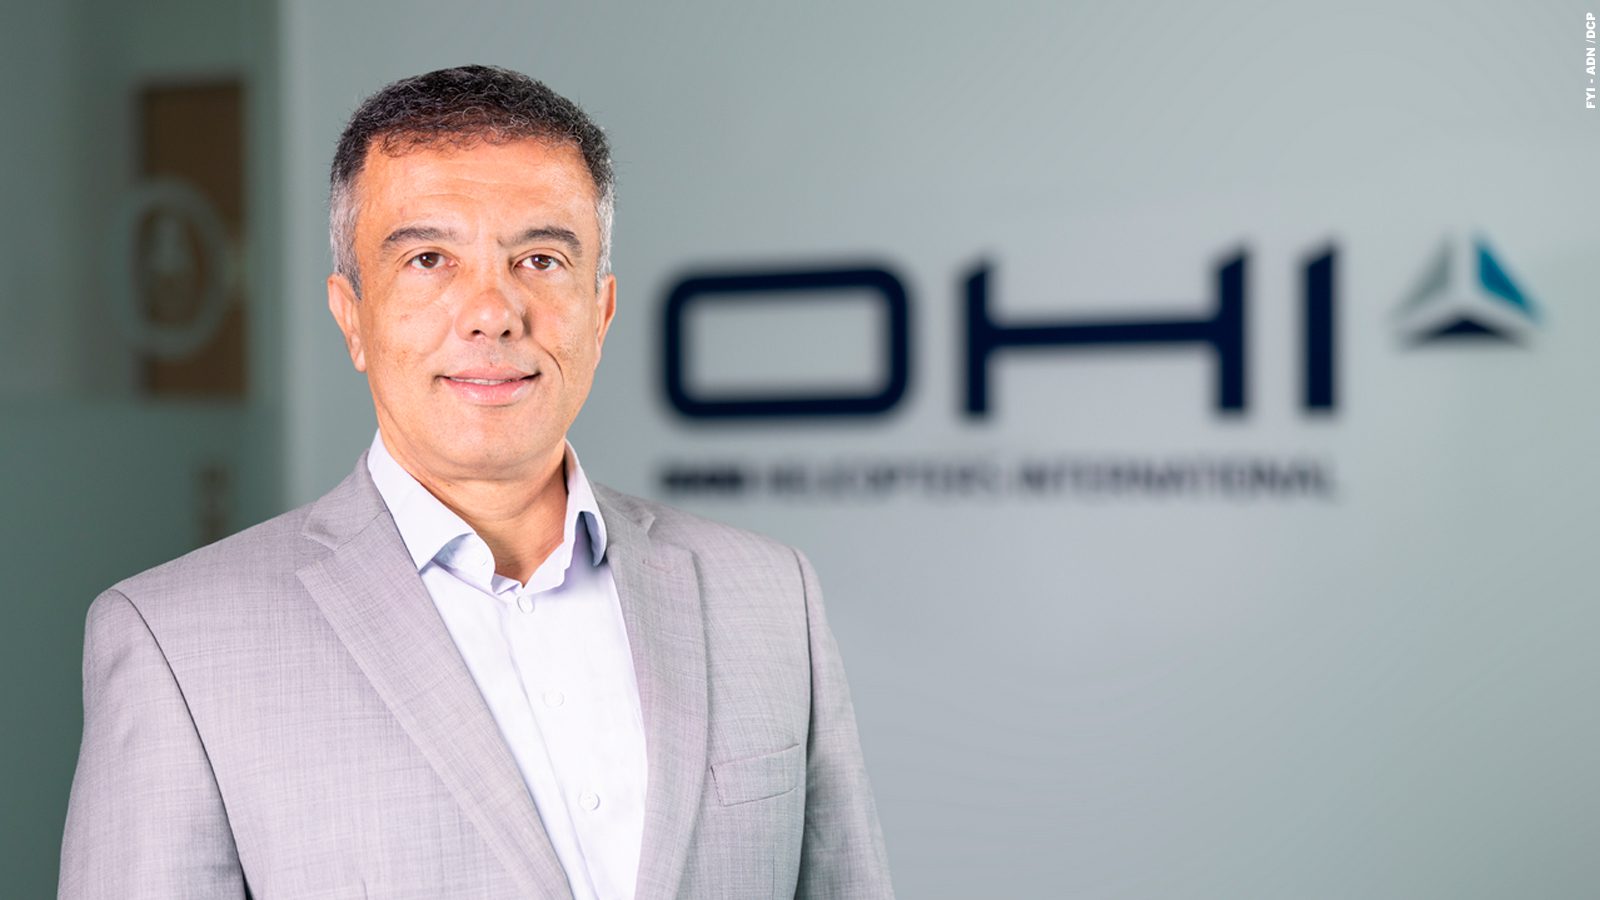 Omni Helicopters International (OHI), one of the largest providers of air mobility solutions in Latin America